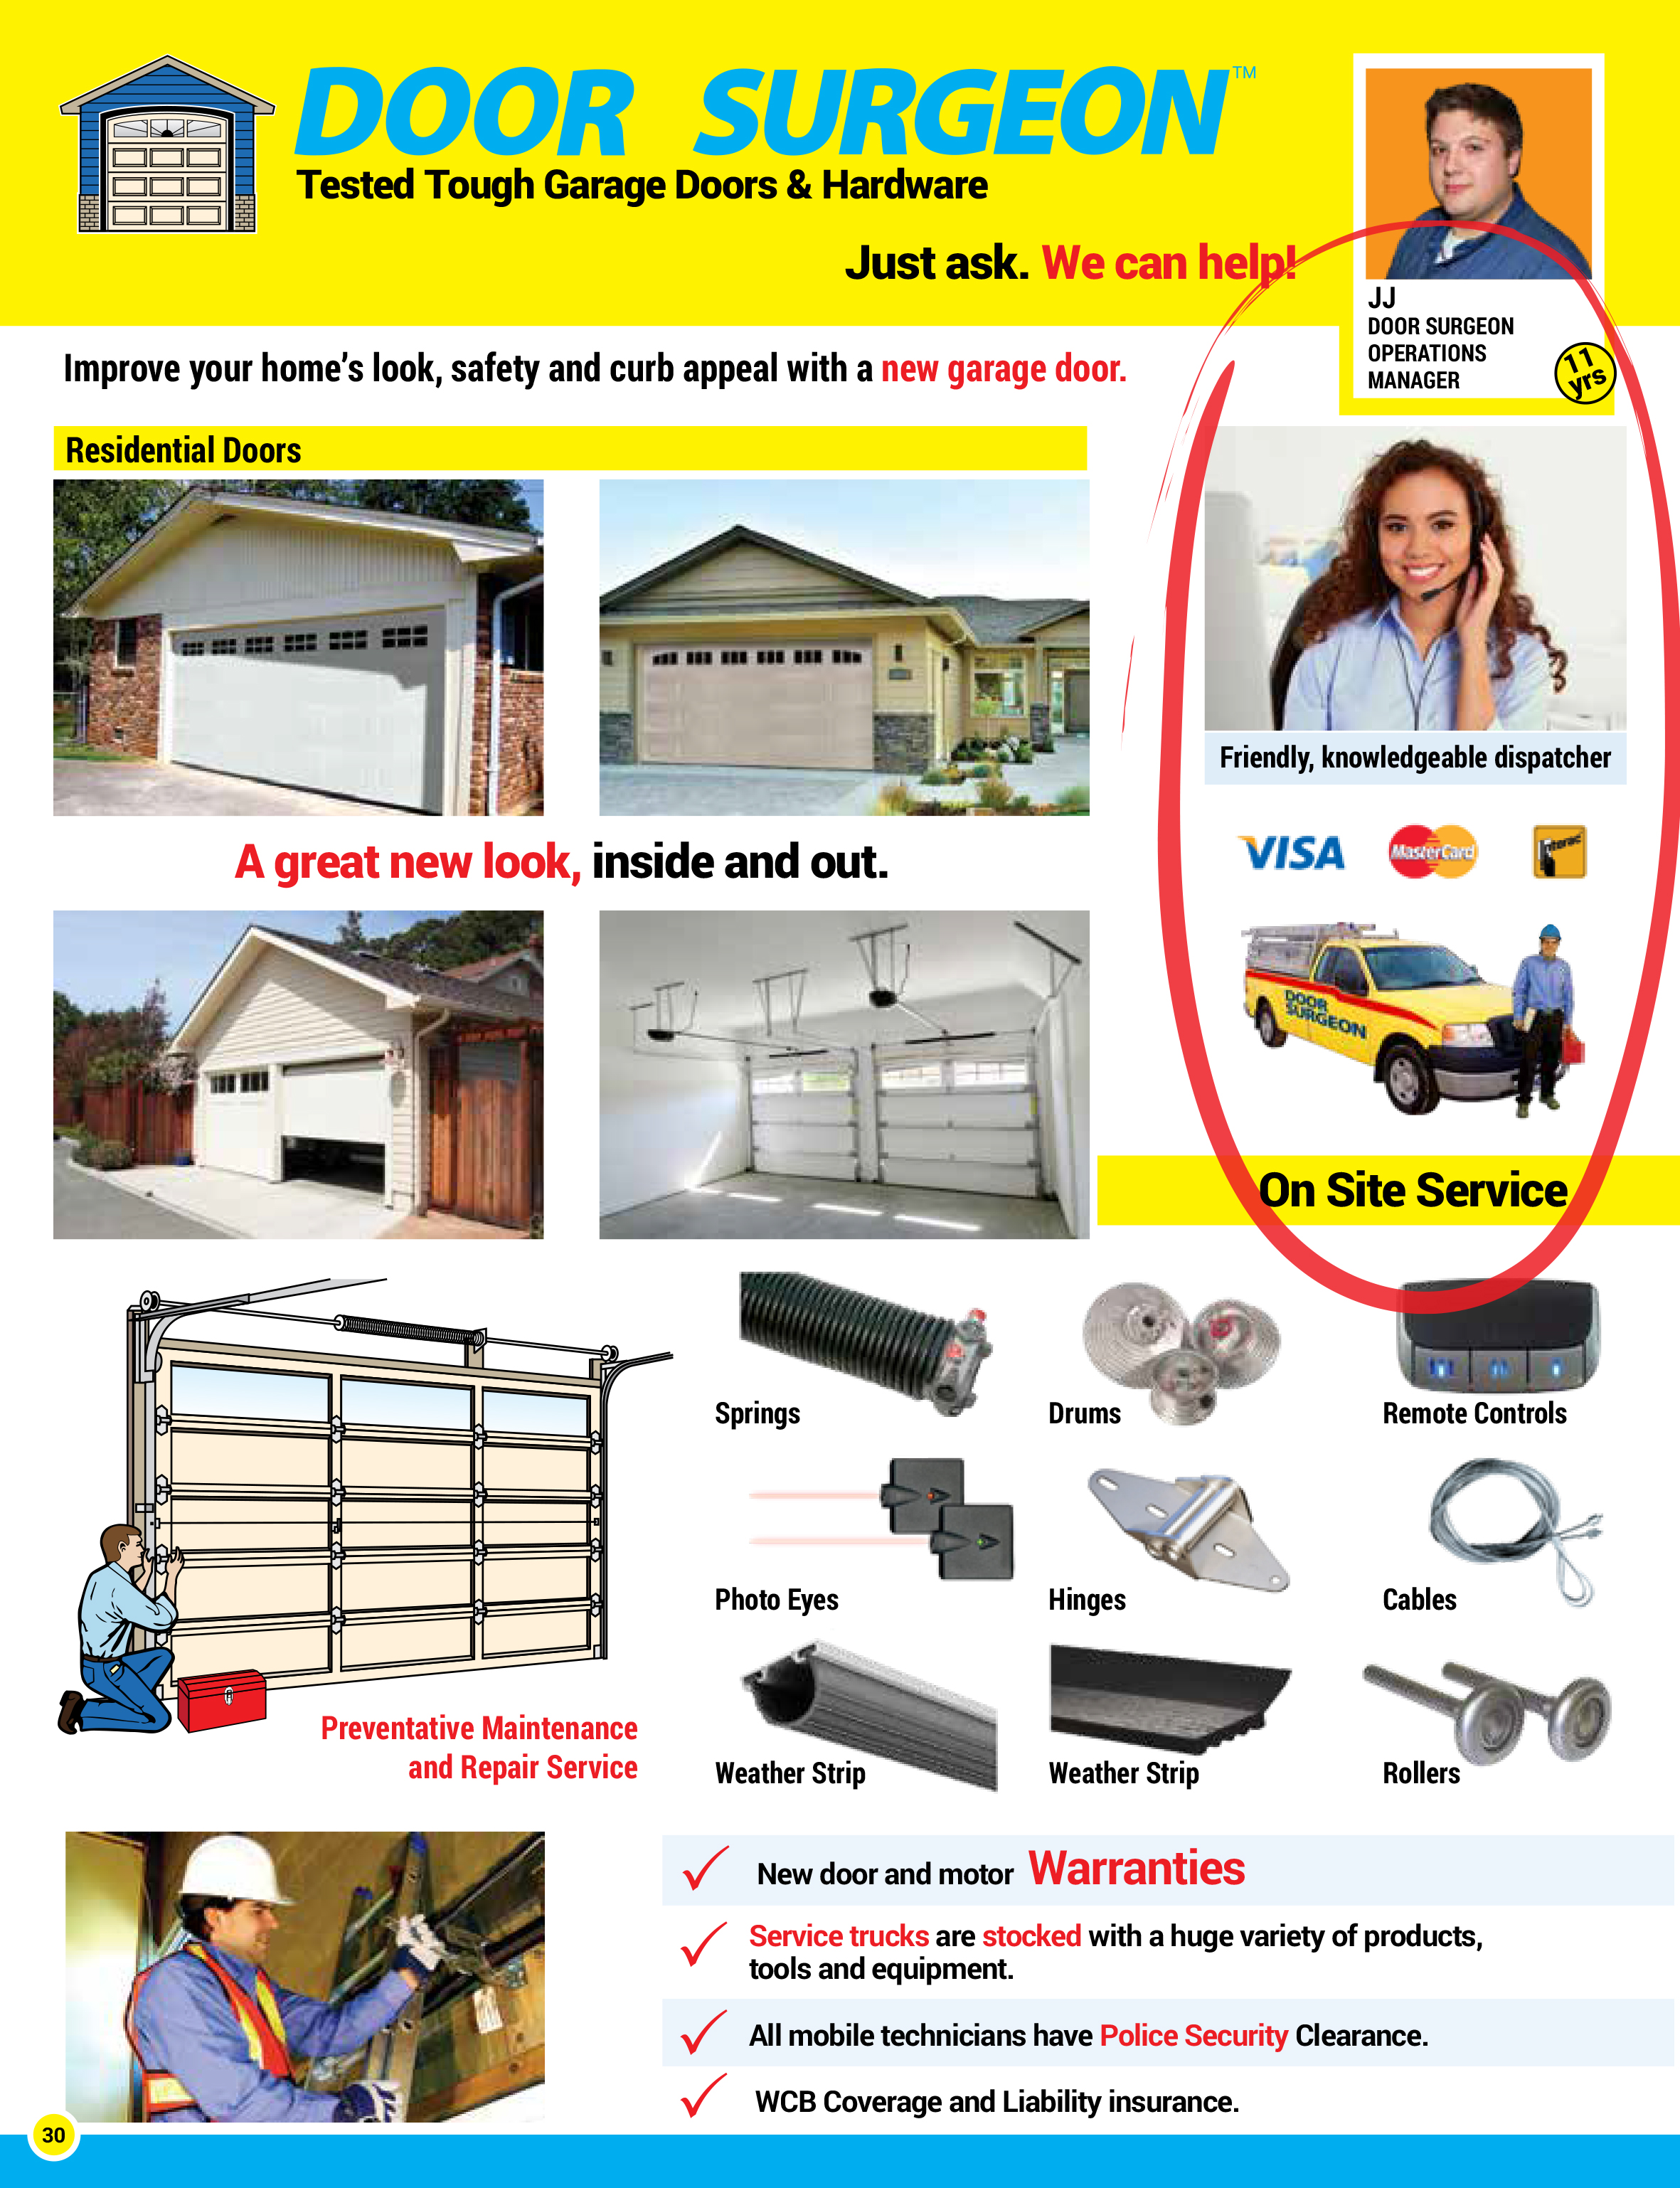 Residential Garage door replacement openers, cables, drums, rollers, hinges and other componenets.